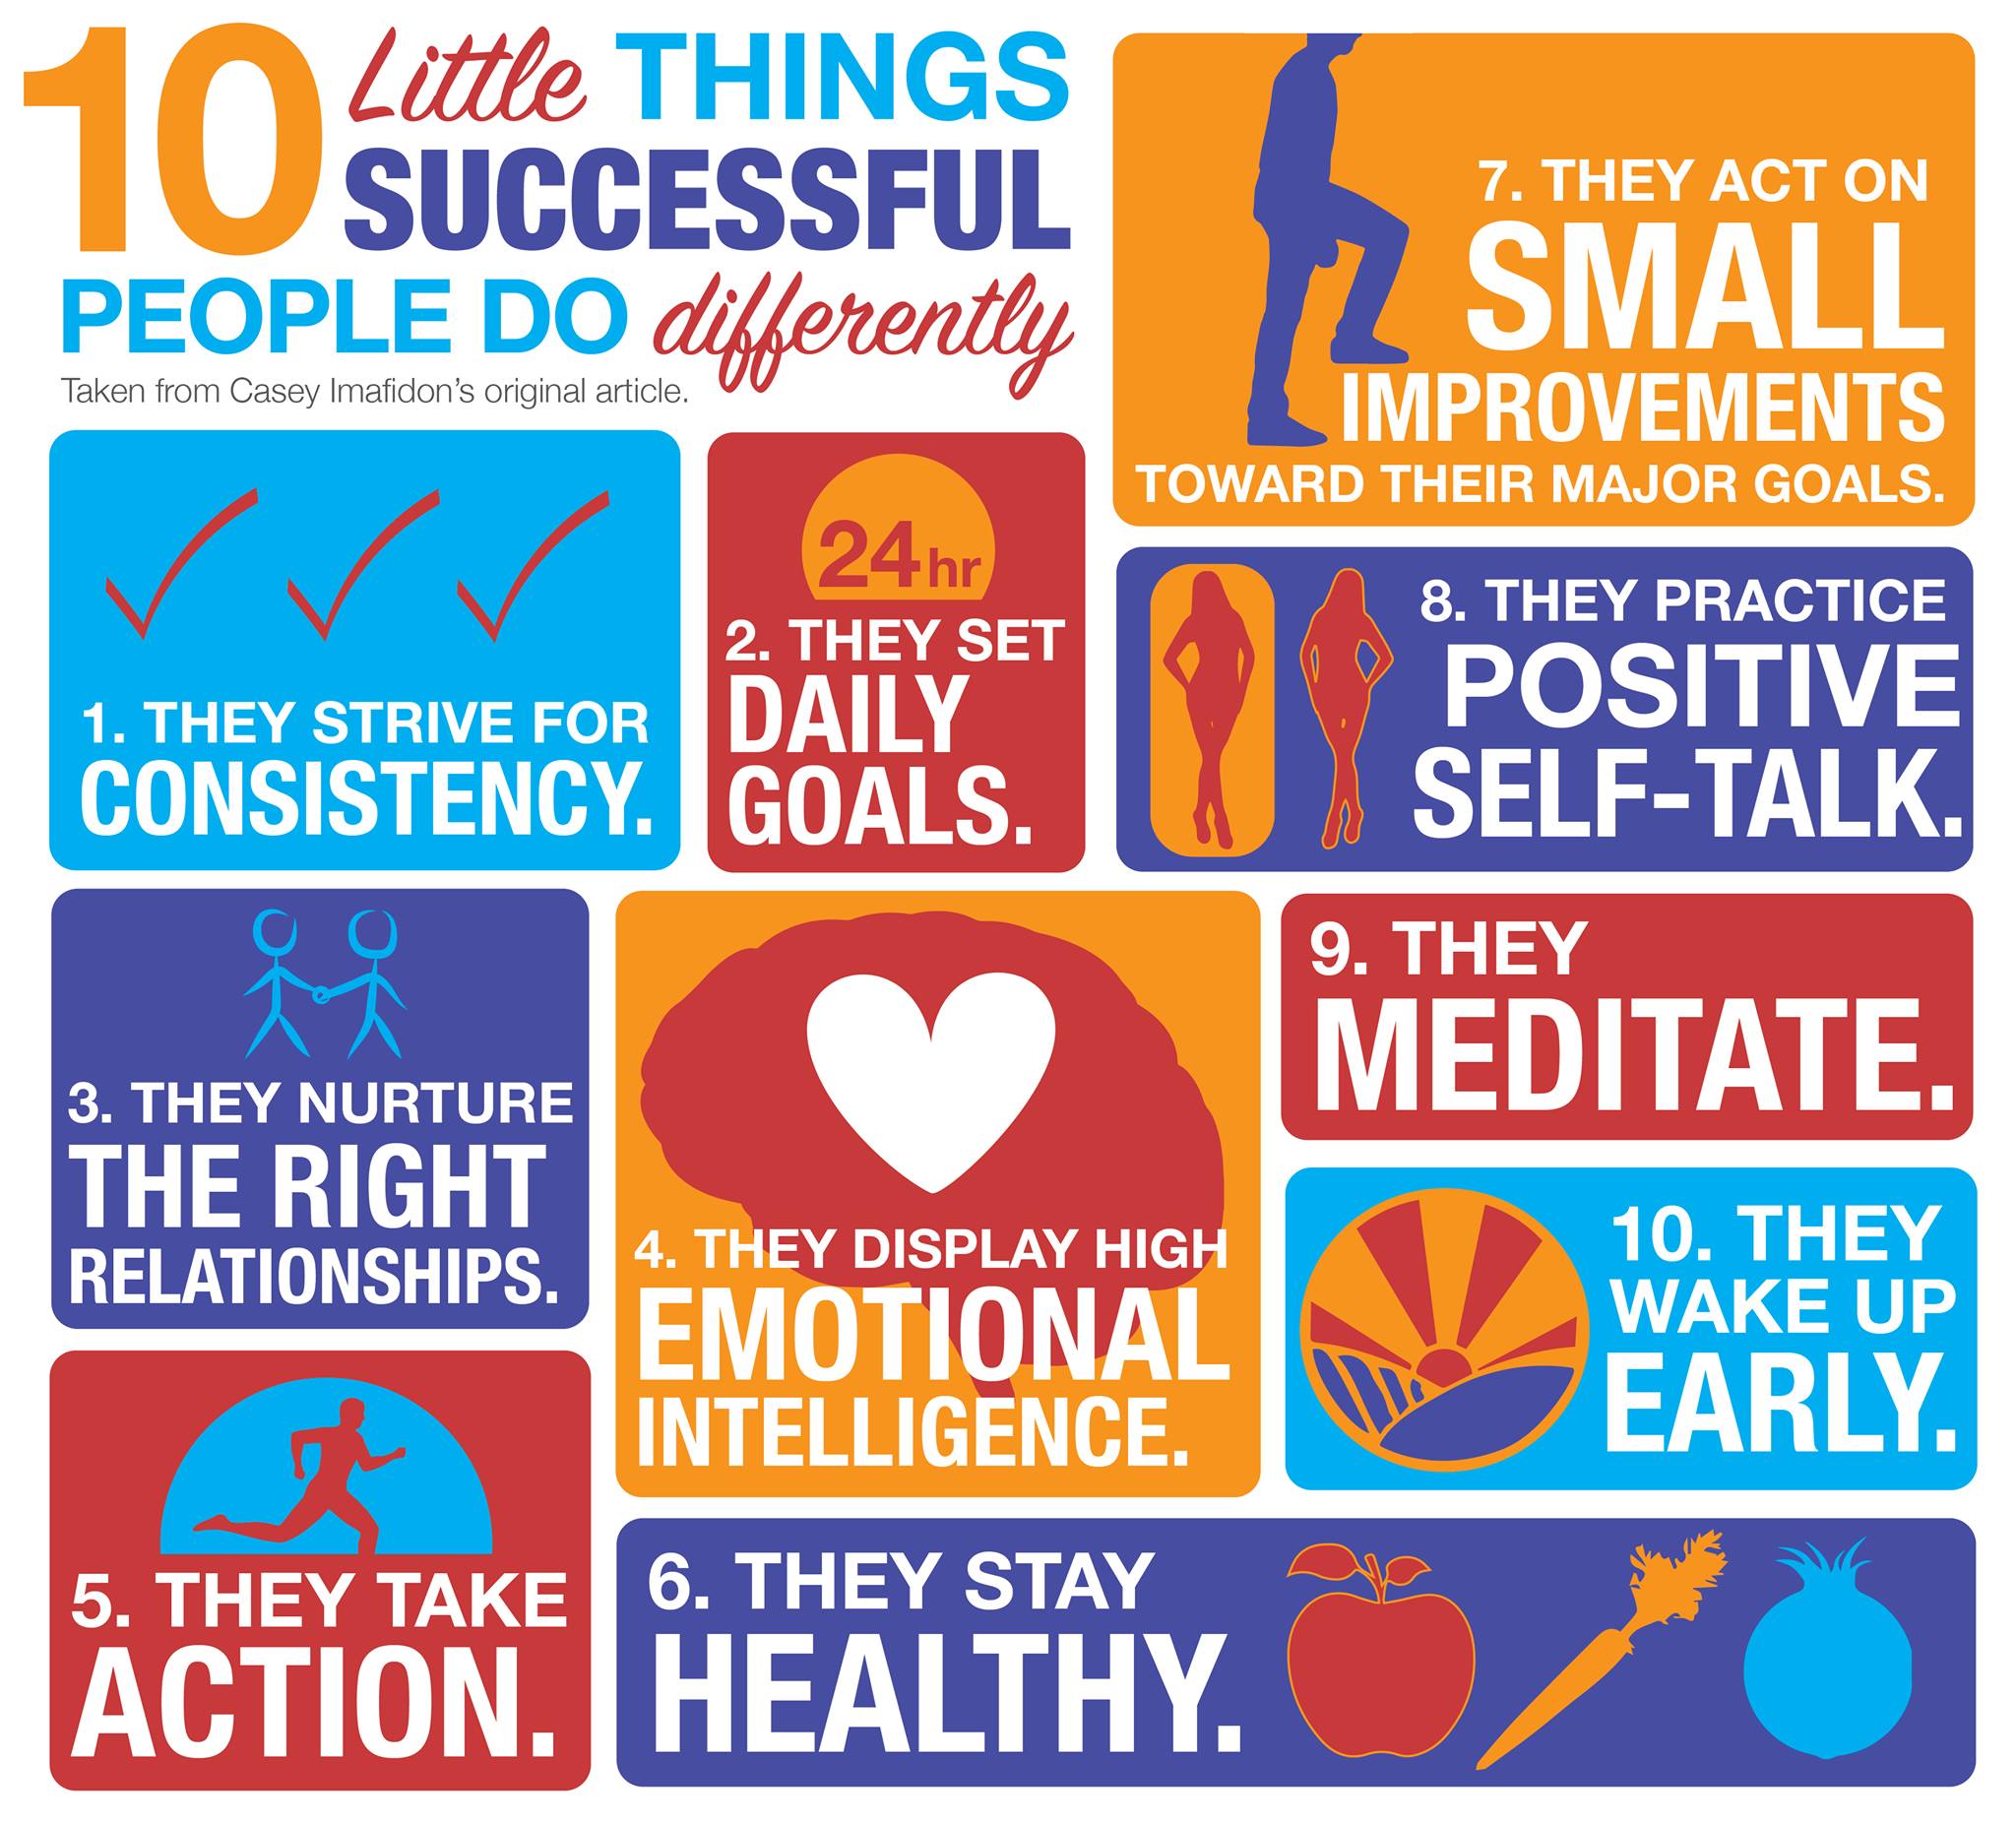 Chris Towland on Twitter "10 little things that successful people do